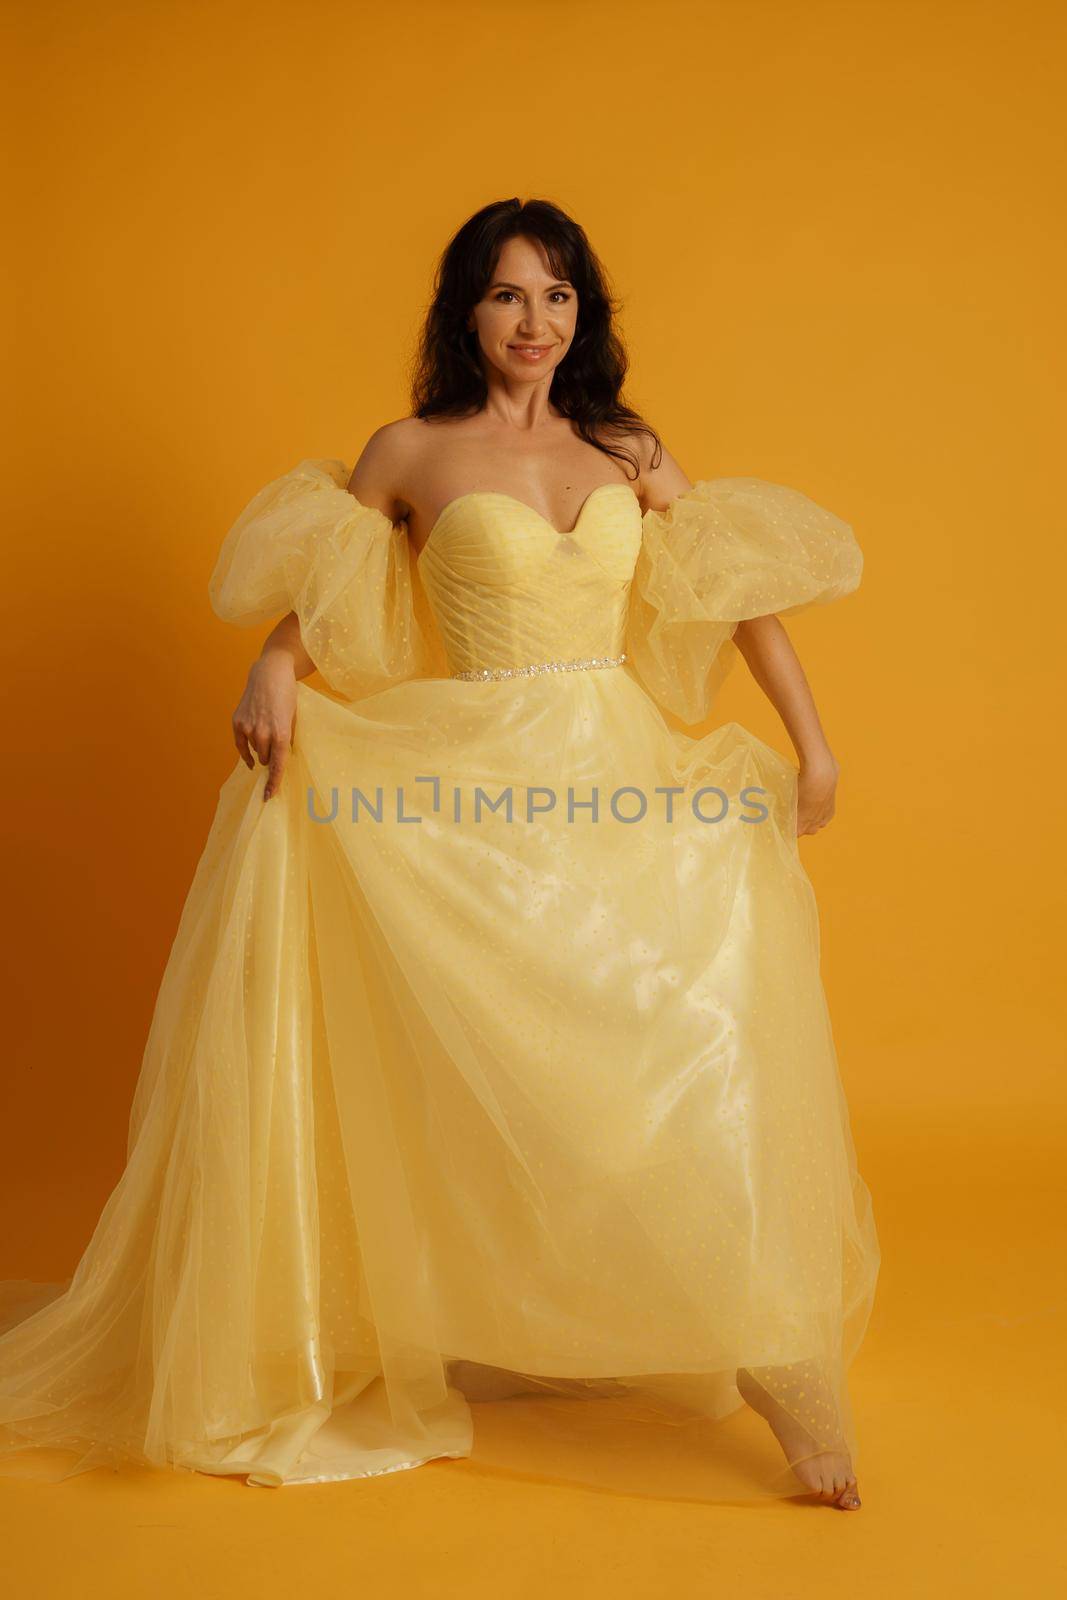 Portrait of a beautiful middle-aged woman in a yellow dress, her hair pulled up against a yellow background.